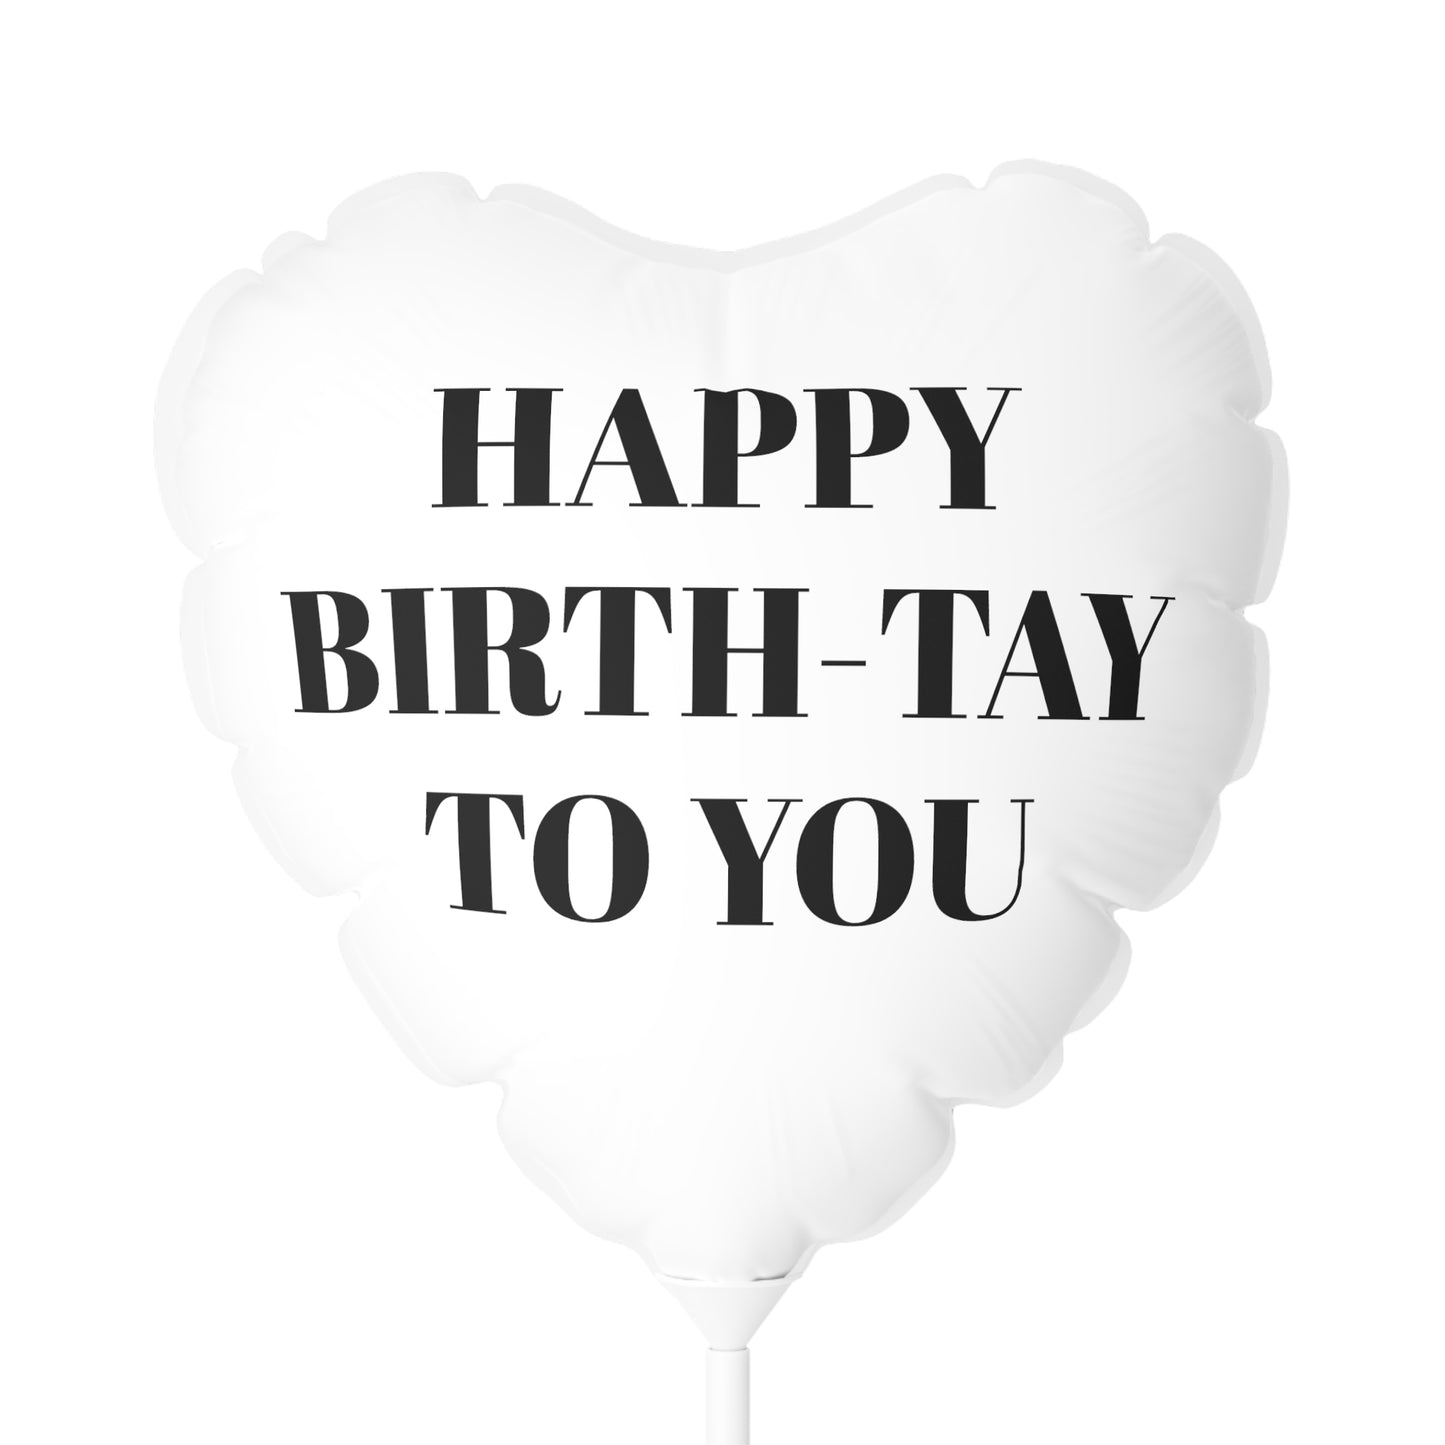 Always A Reason To Celebrate Collection- Happy Birth-TAY Balloon (Round and Heart-shaped), 11"